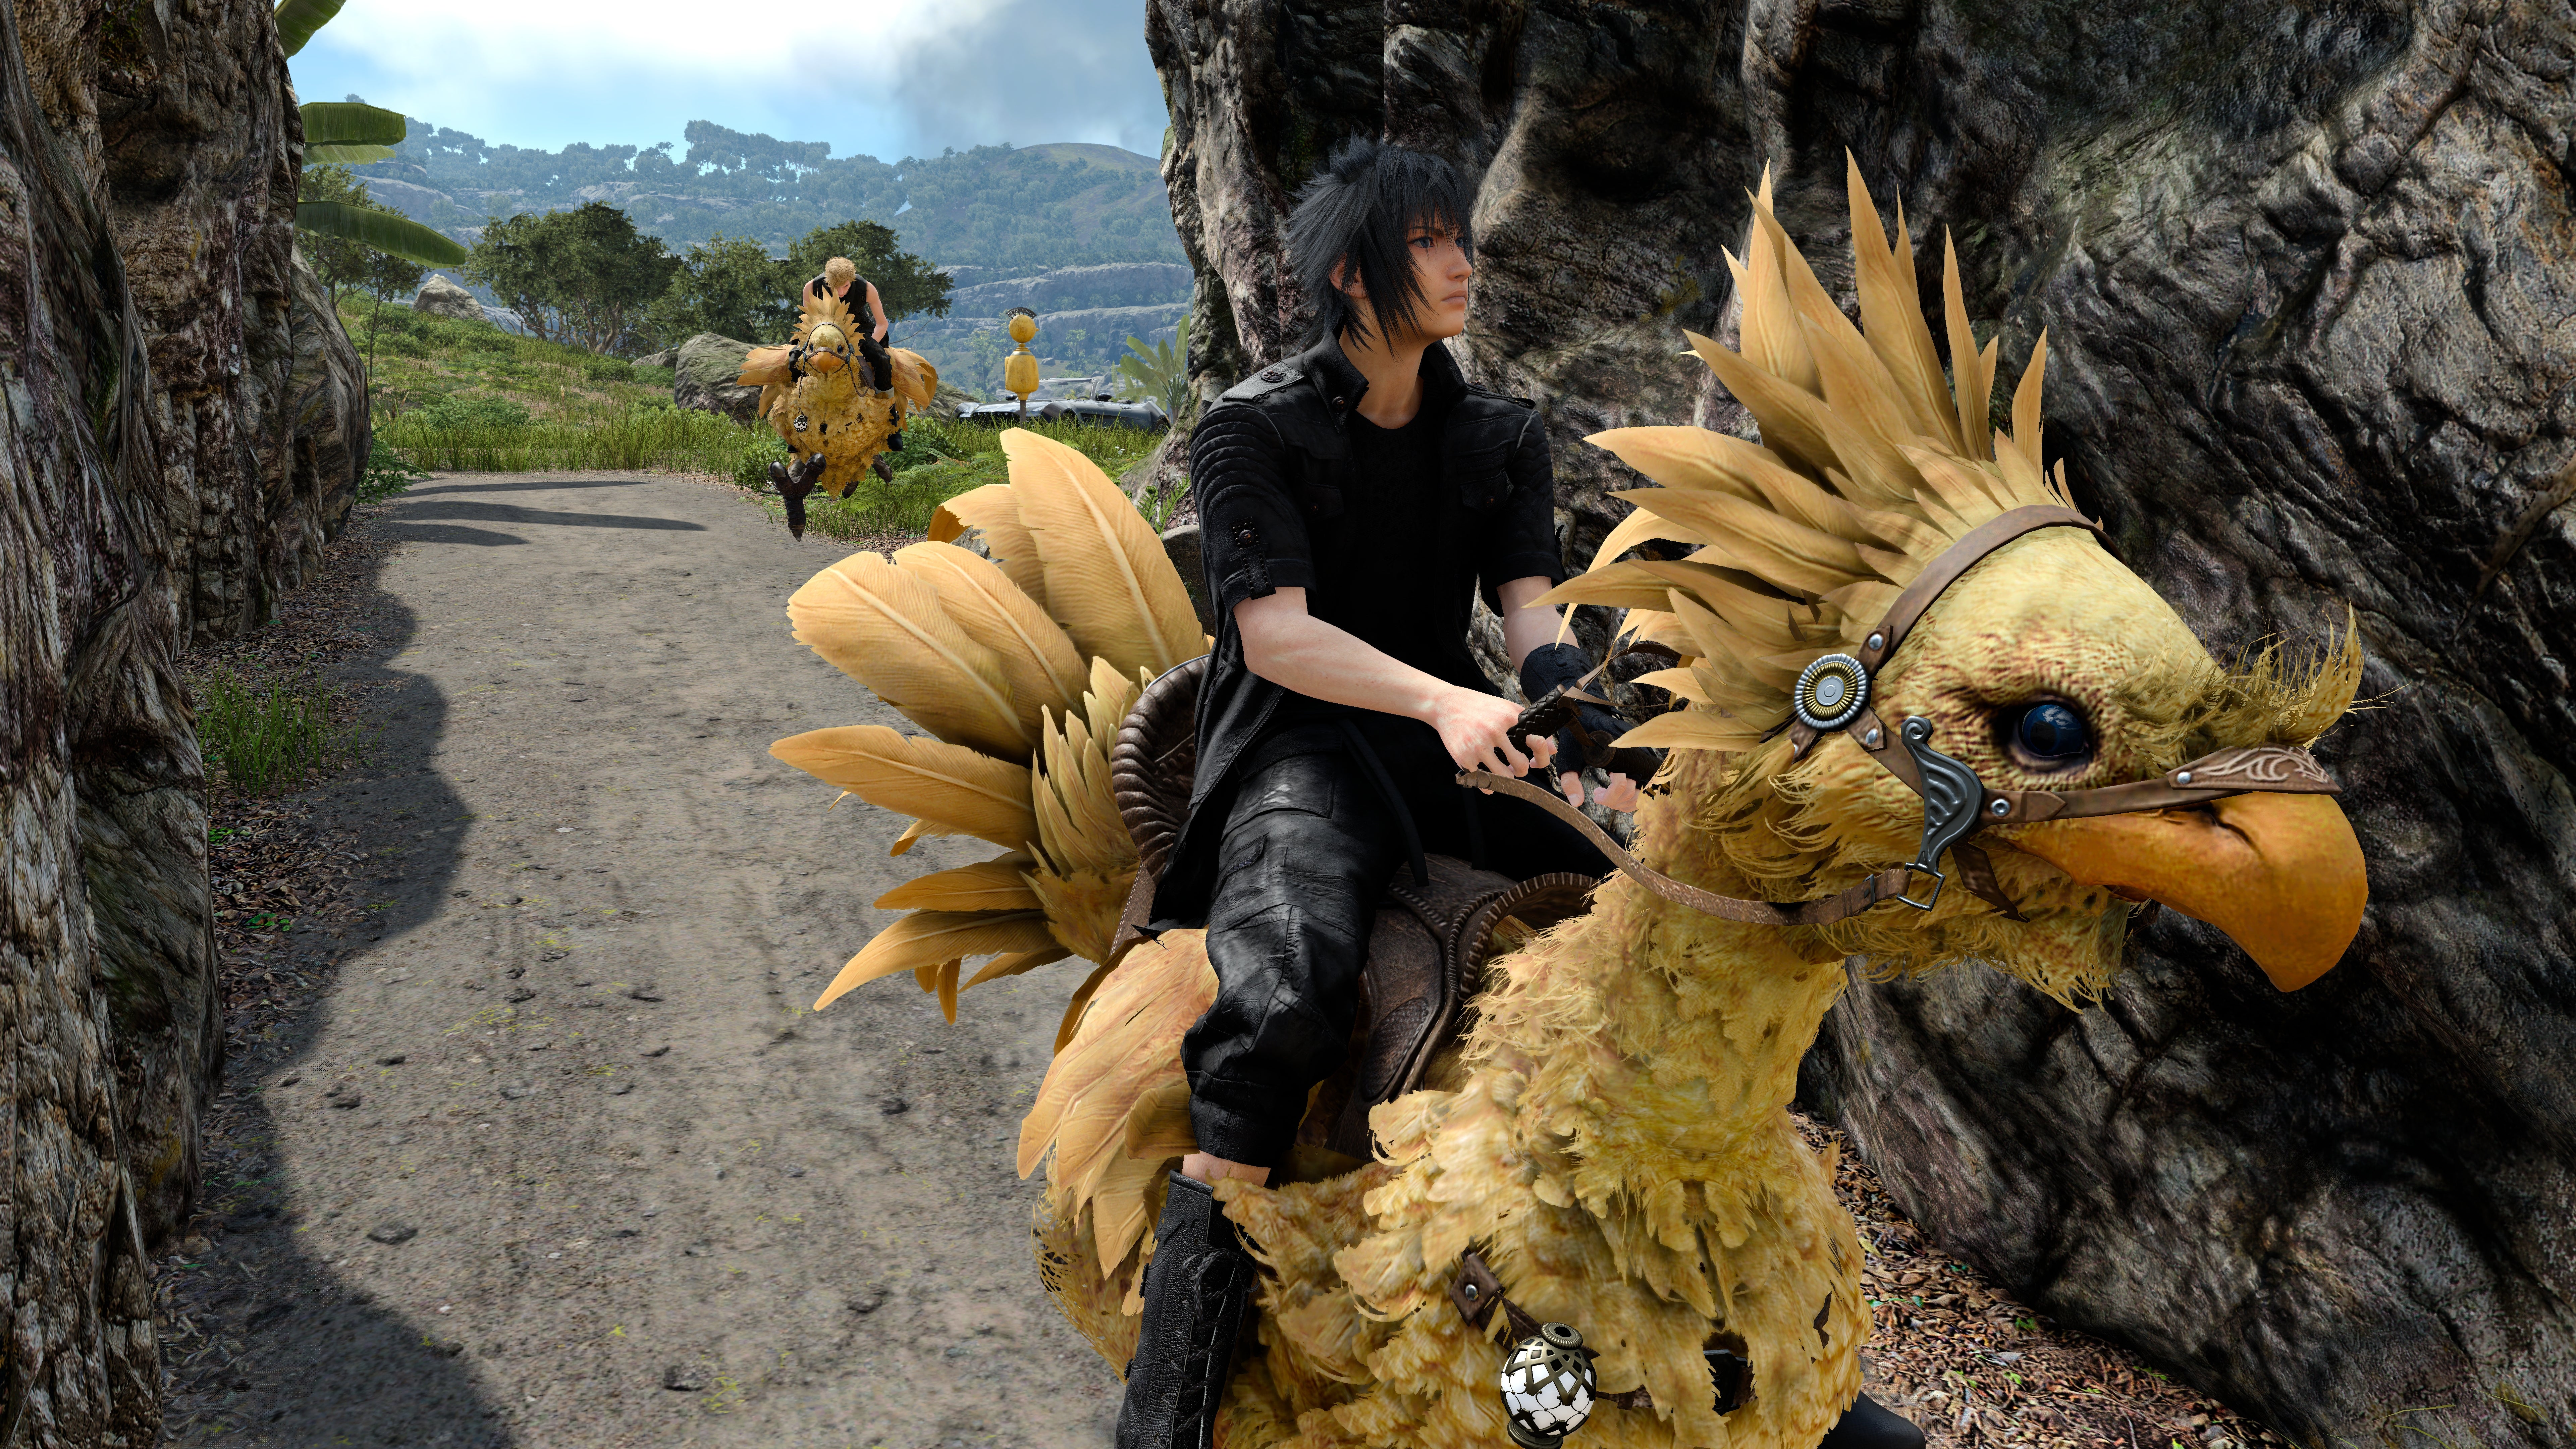 Image for Final Fantasy 15's PC version supports Nvidia Ansel, so here's some crazy 8K resolution screenshots